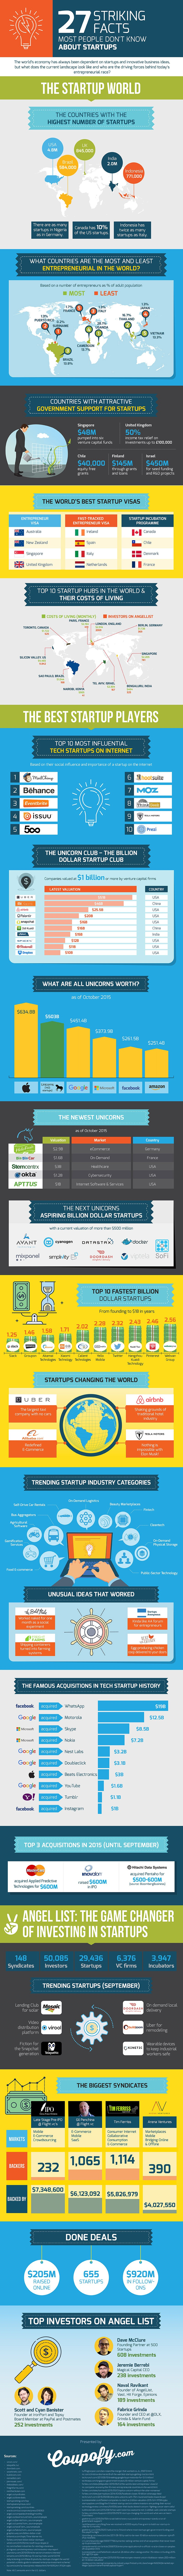 27 Striking Facts Most People Don’t Know About Startups – Infographic